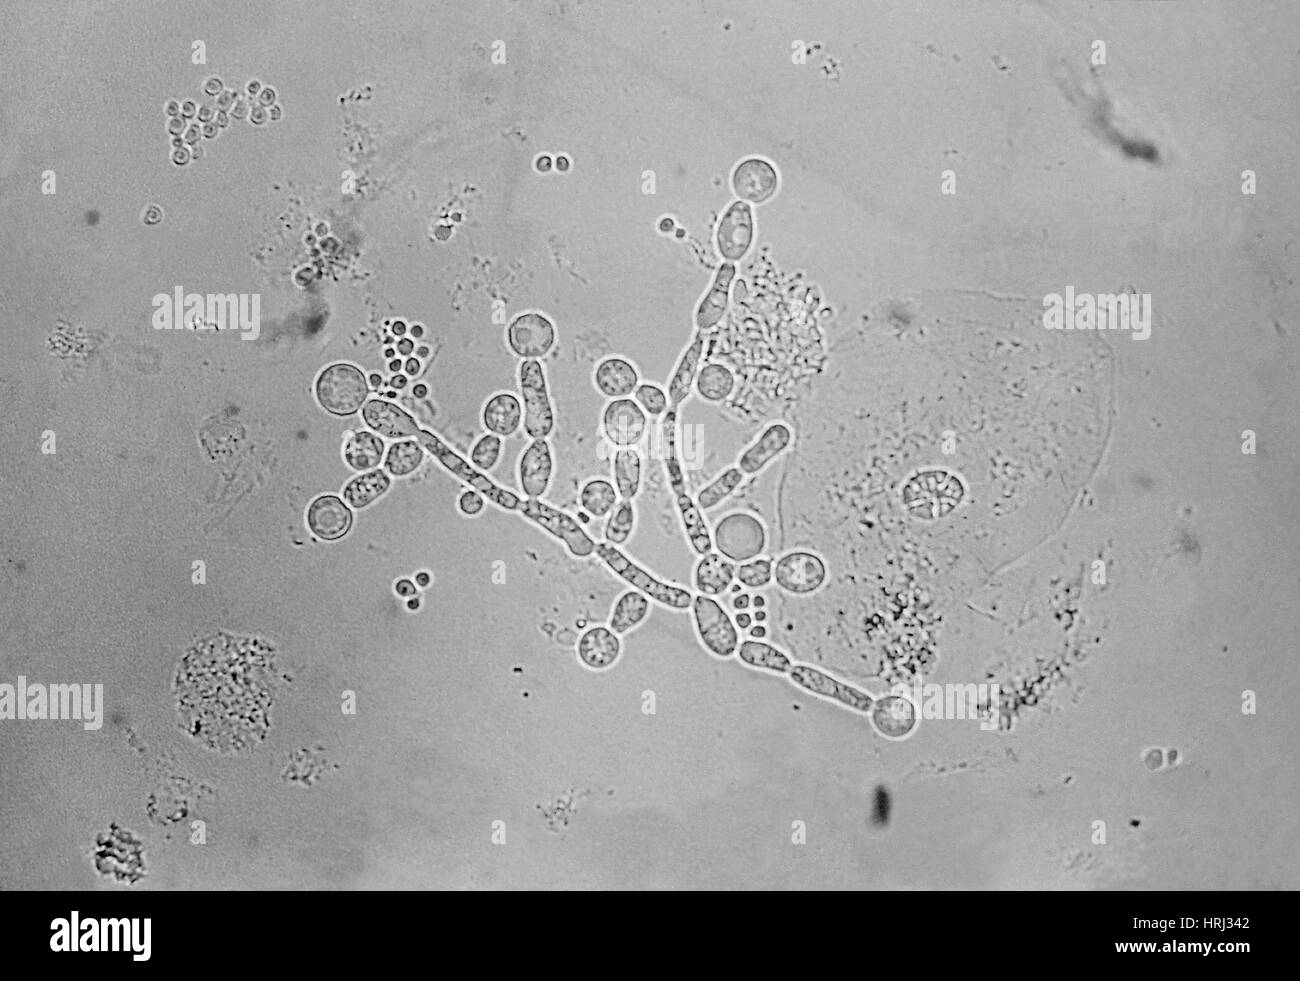 Candidiasis albicans Black and White Stock Photos & Images - Alamy